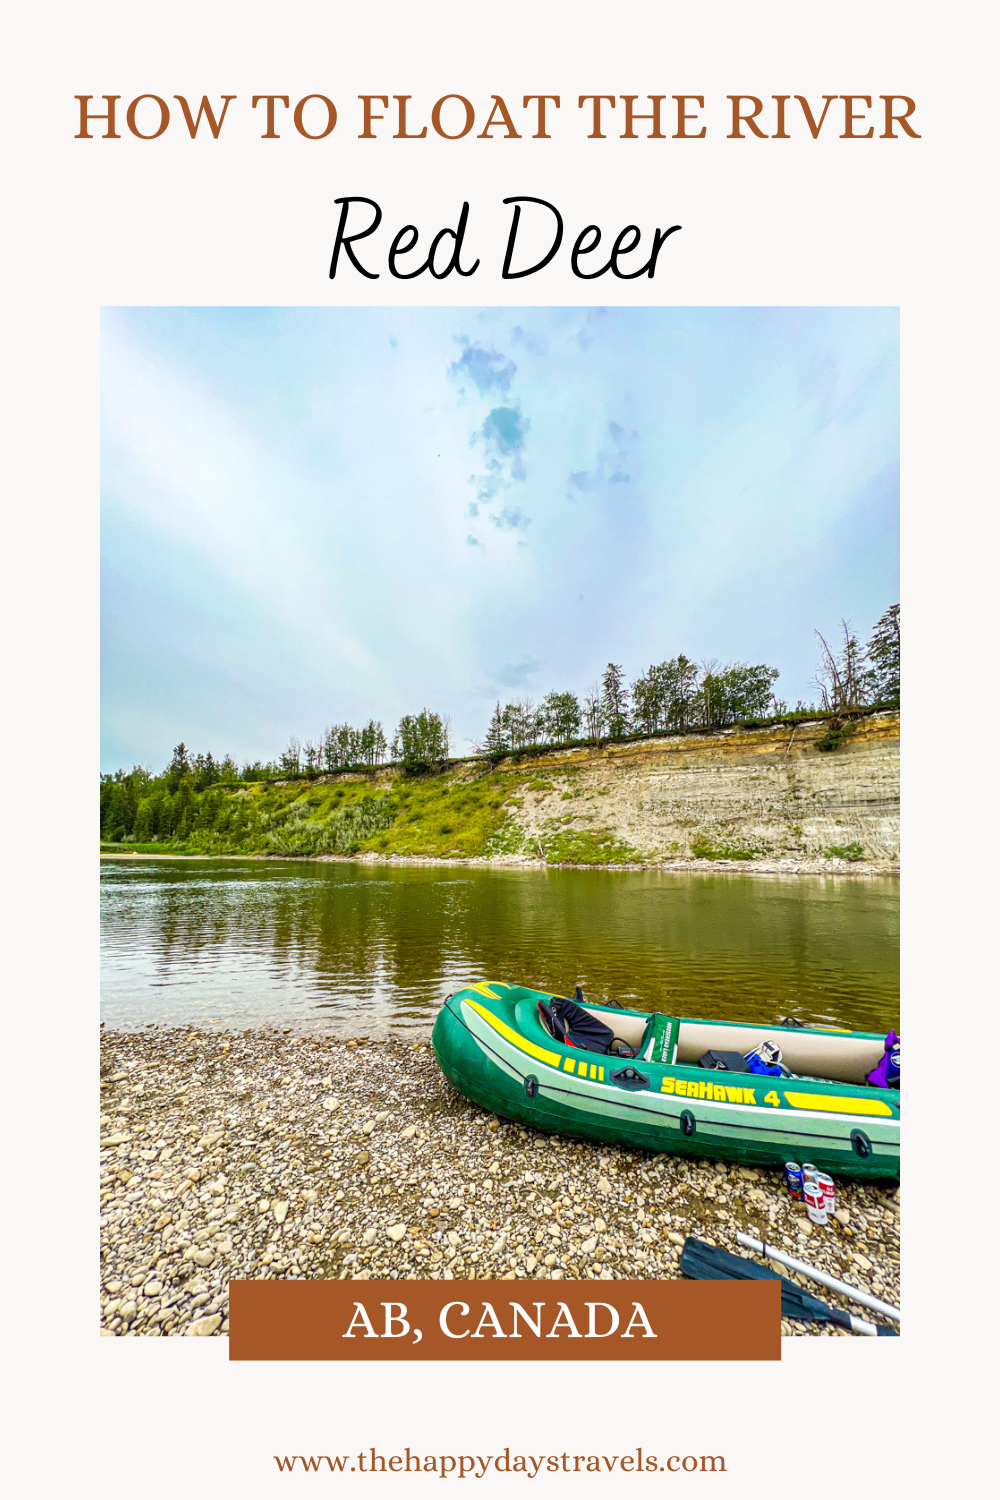 Pin image of 'how to float the river Red Deer AB Canada' with image of boat on the river bank of Red Deer in centre in Alberta Canada